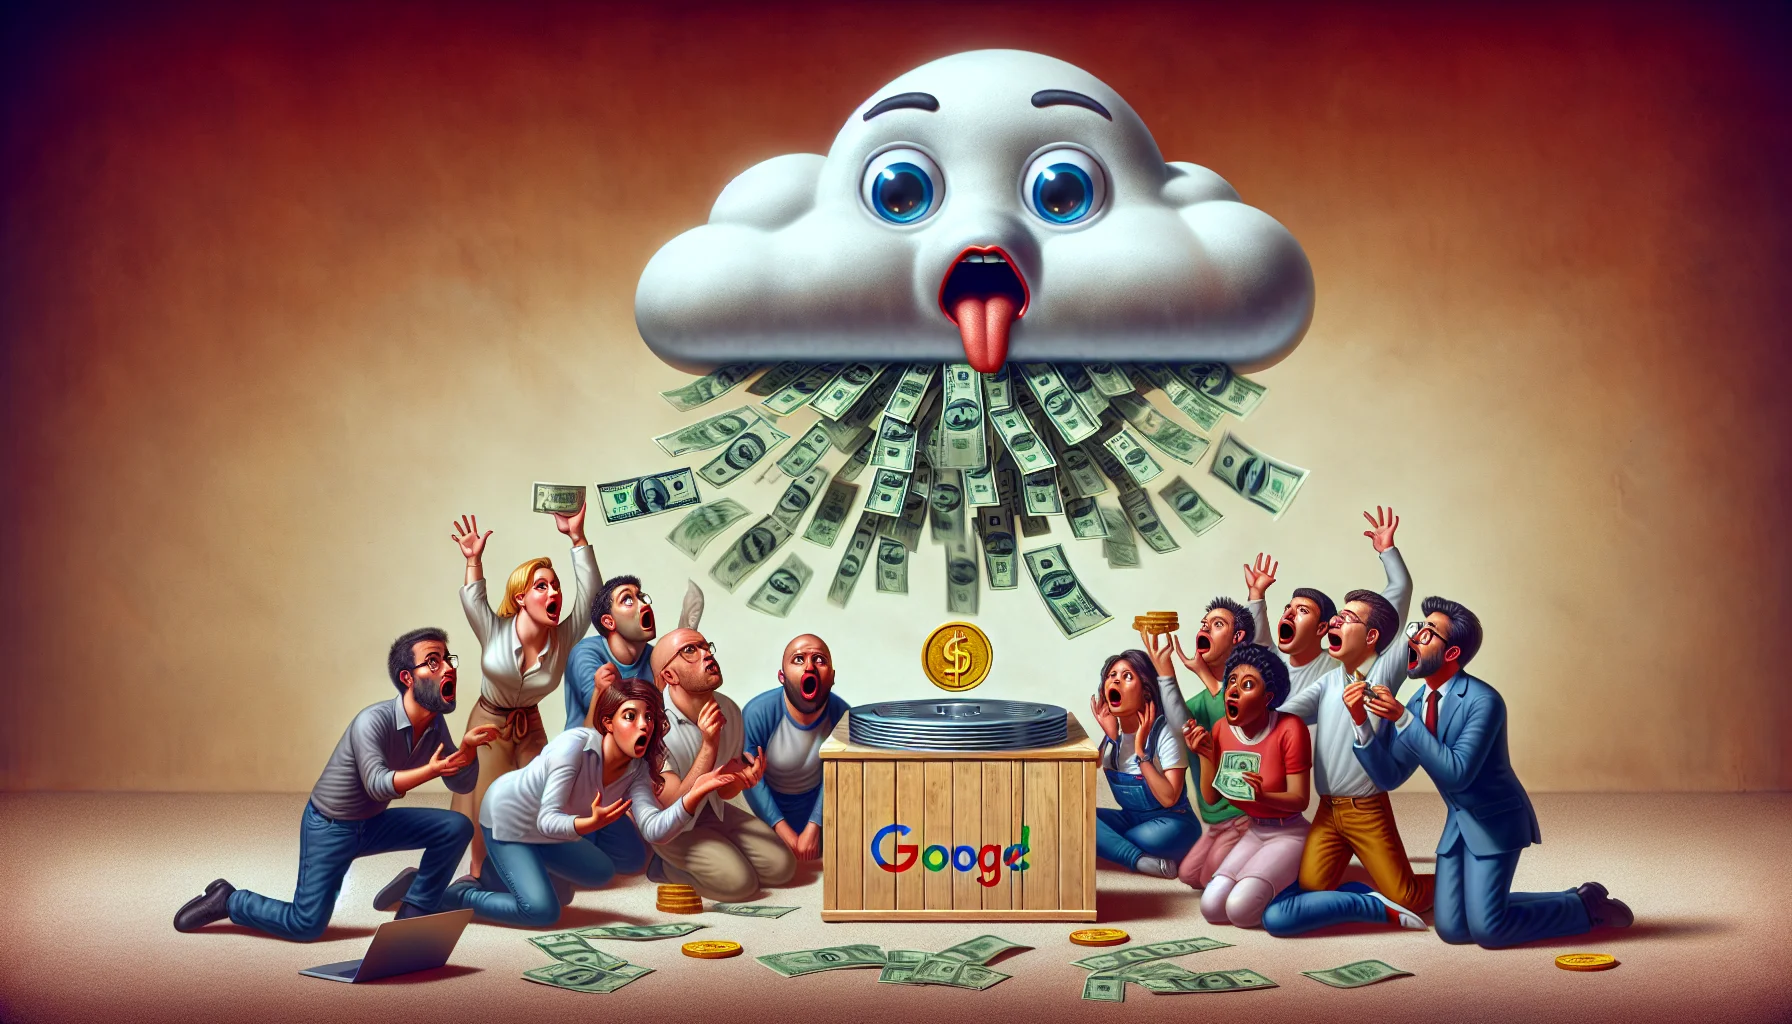 Create a humorous, yet realistic art composition that showcases the concept of the cost of Google Cloud hosting for web applications. Imagine a scene where multiple anthropomorphic cash bills are being sucked into a large, glowing cloud symbolizing Google Cloud. Amidst this, a group of surprised and bewildered web developers, both male and female, from various descents (Caucasian, Hispanic, Black, Middle-Eastern, and South Asian) watch agape, holding their laptops and computers. One developer is optimistically holding out a tiny coin to the cloud, exhibiting a sprinkle of hope in the absurdity.